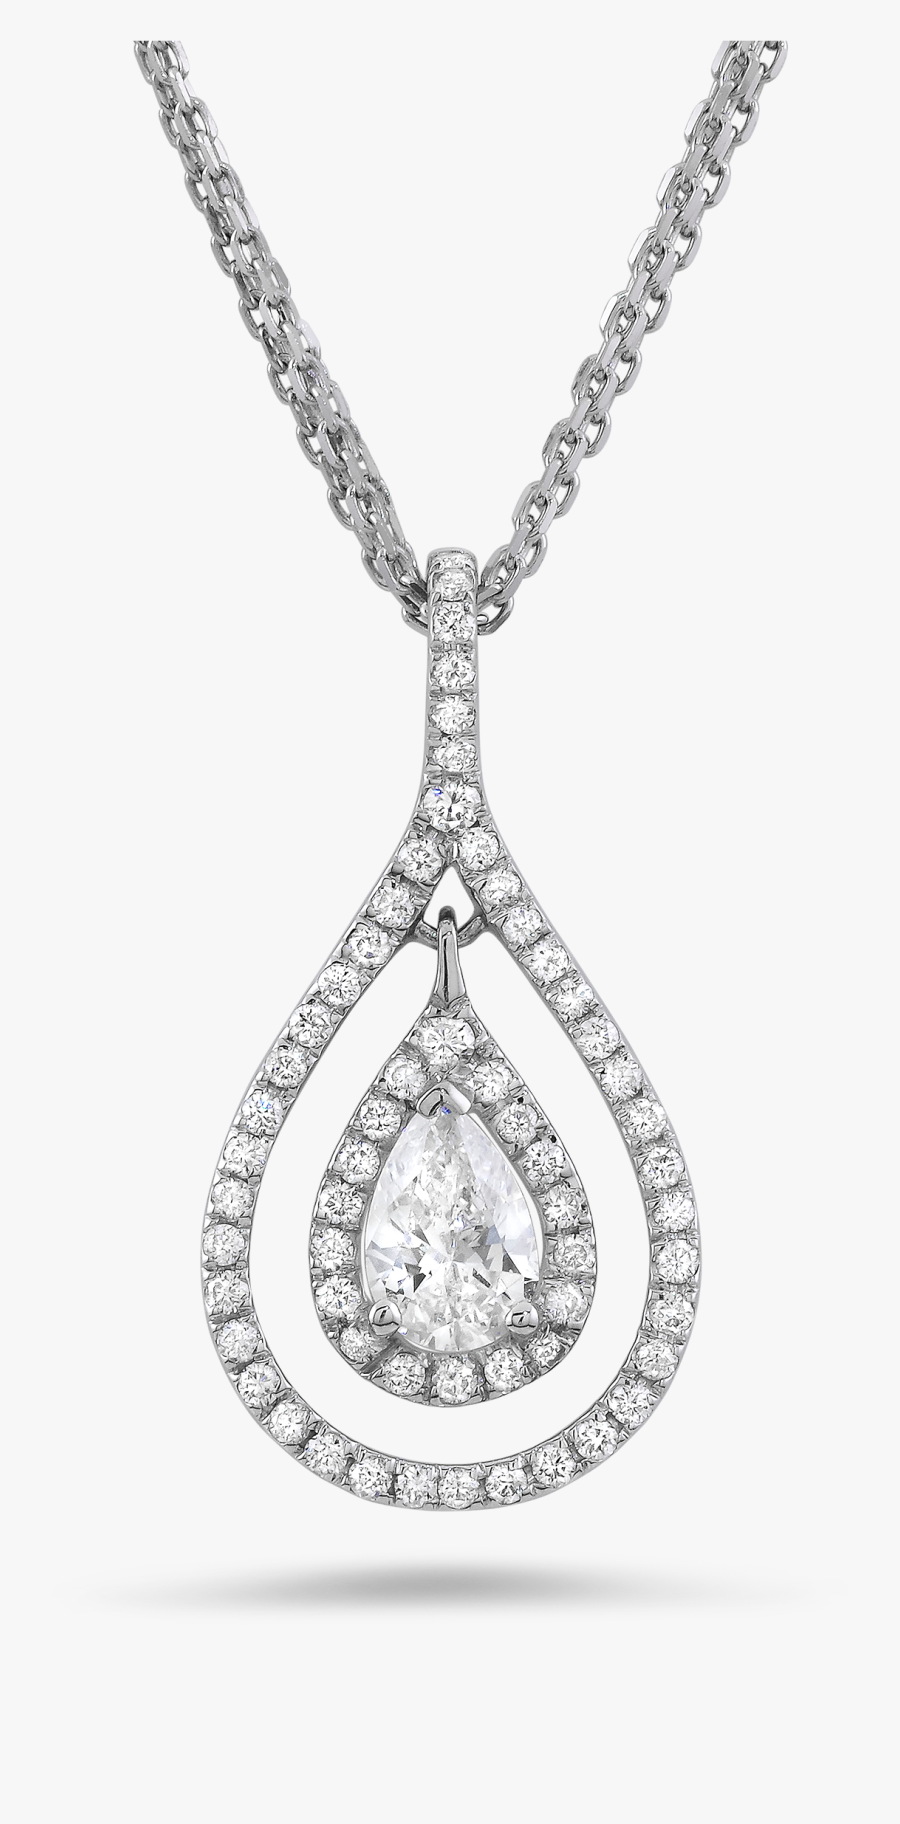 Beautiful Pear Cut Diamond Necklace - Transparent Background Jewelry Png, Transparent Clipart